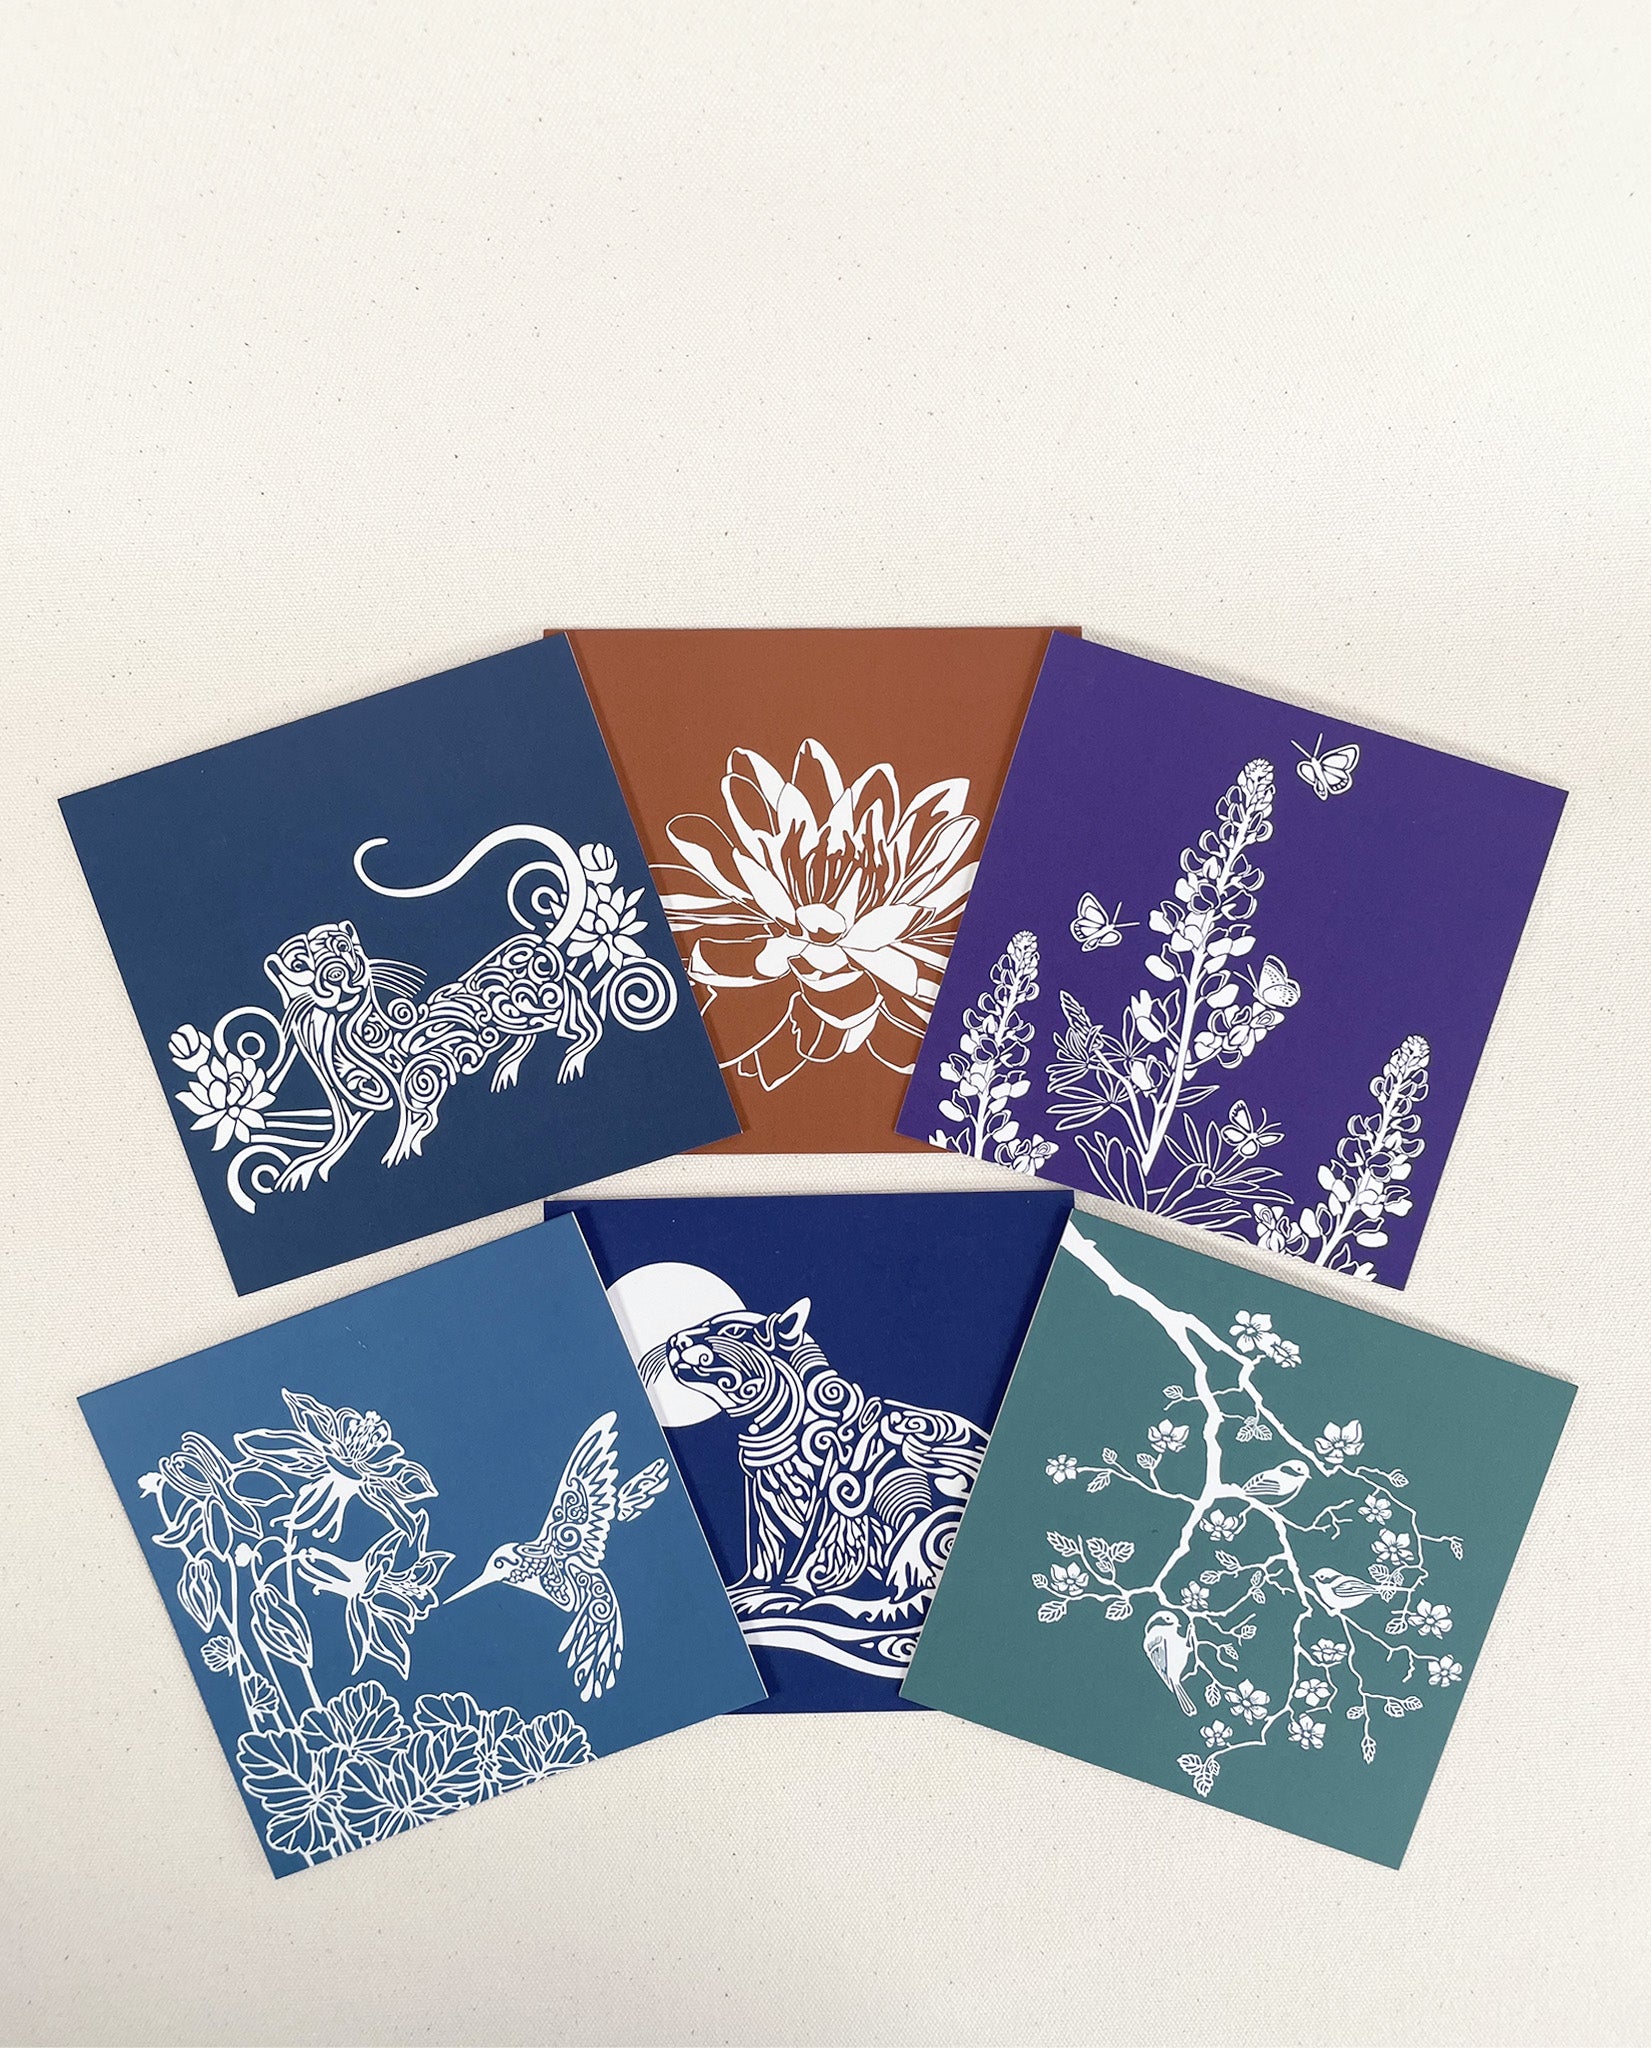 Set of six note cards with nature art, including a River Otter, Hummingbird, Lupine, Lotus, Cat, and Chickadees, by Natalija Walbridge Dock 5